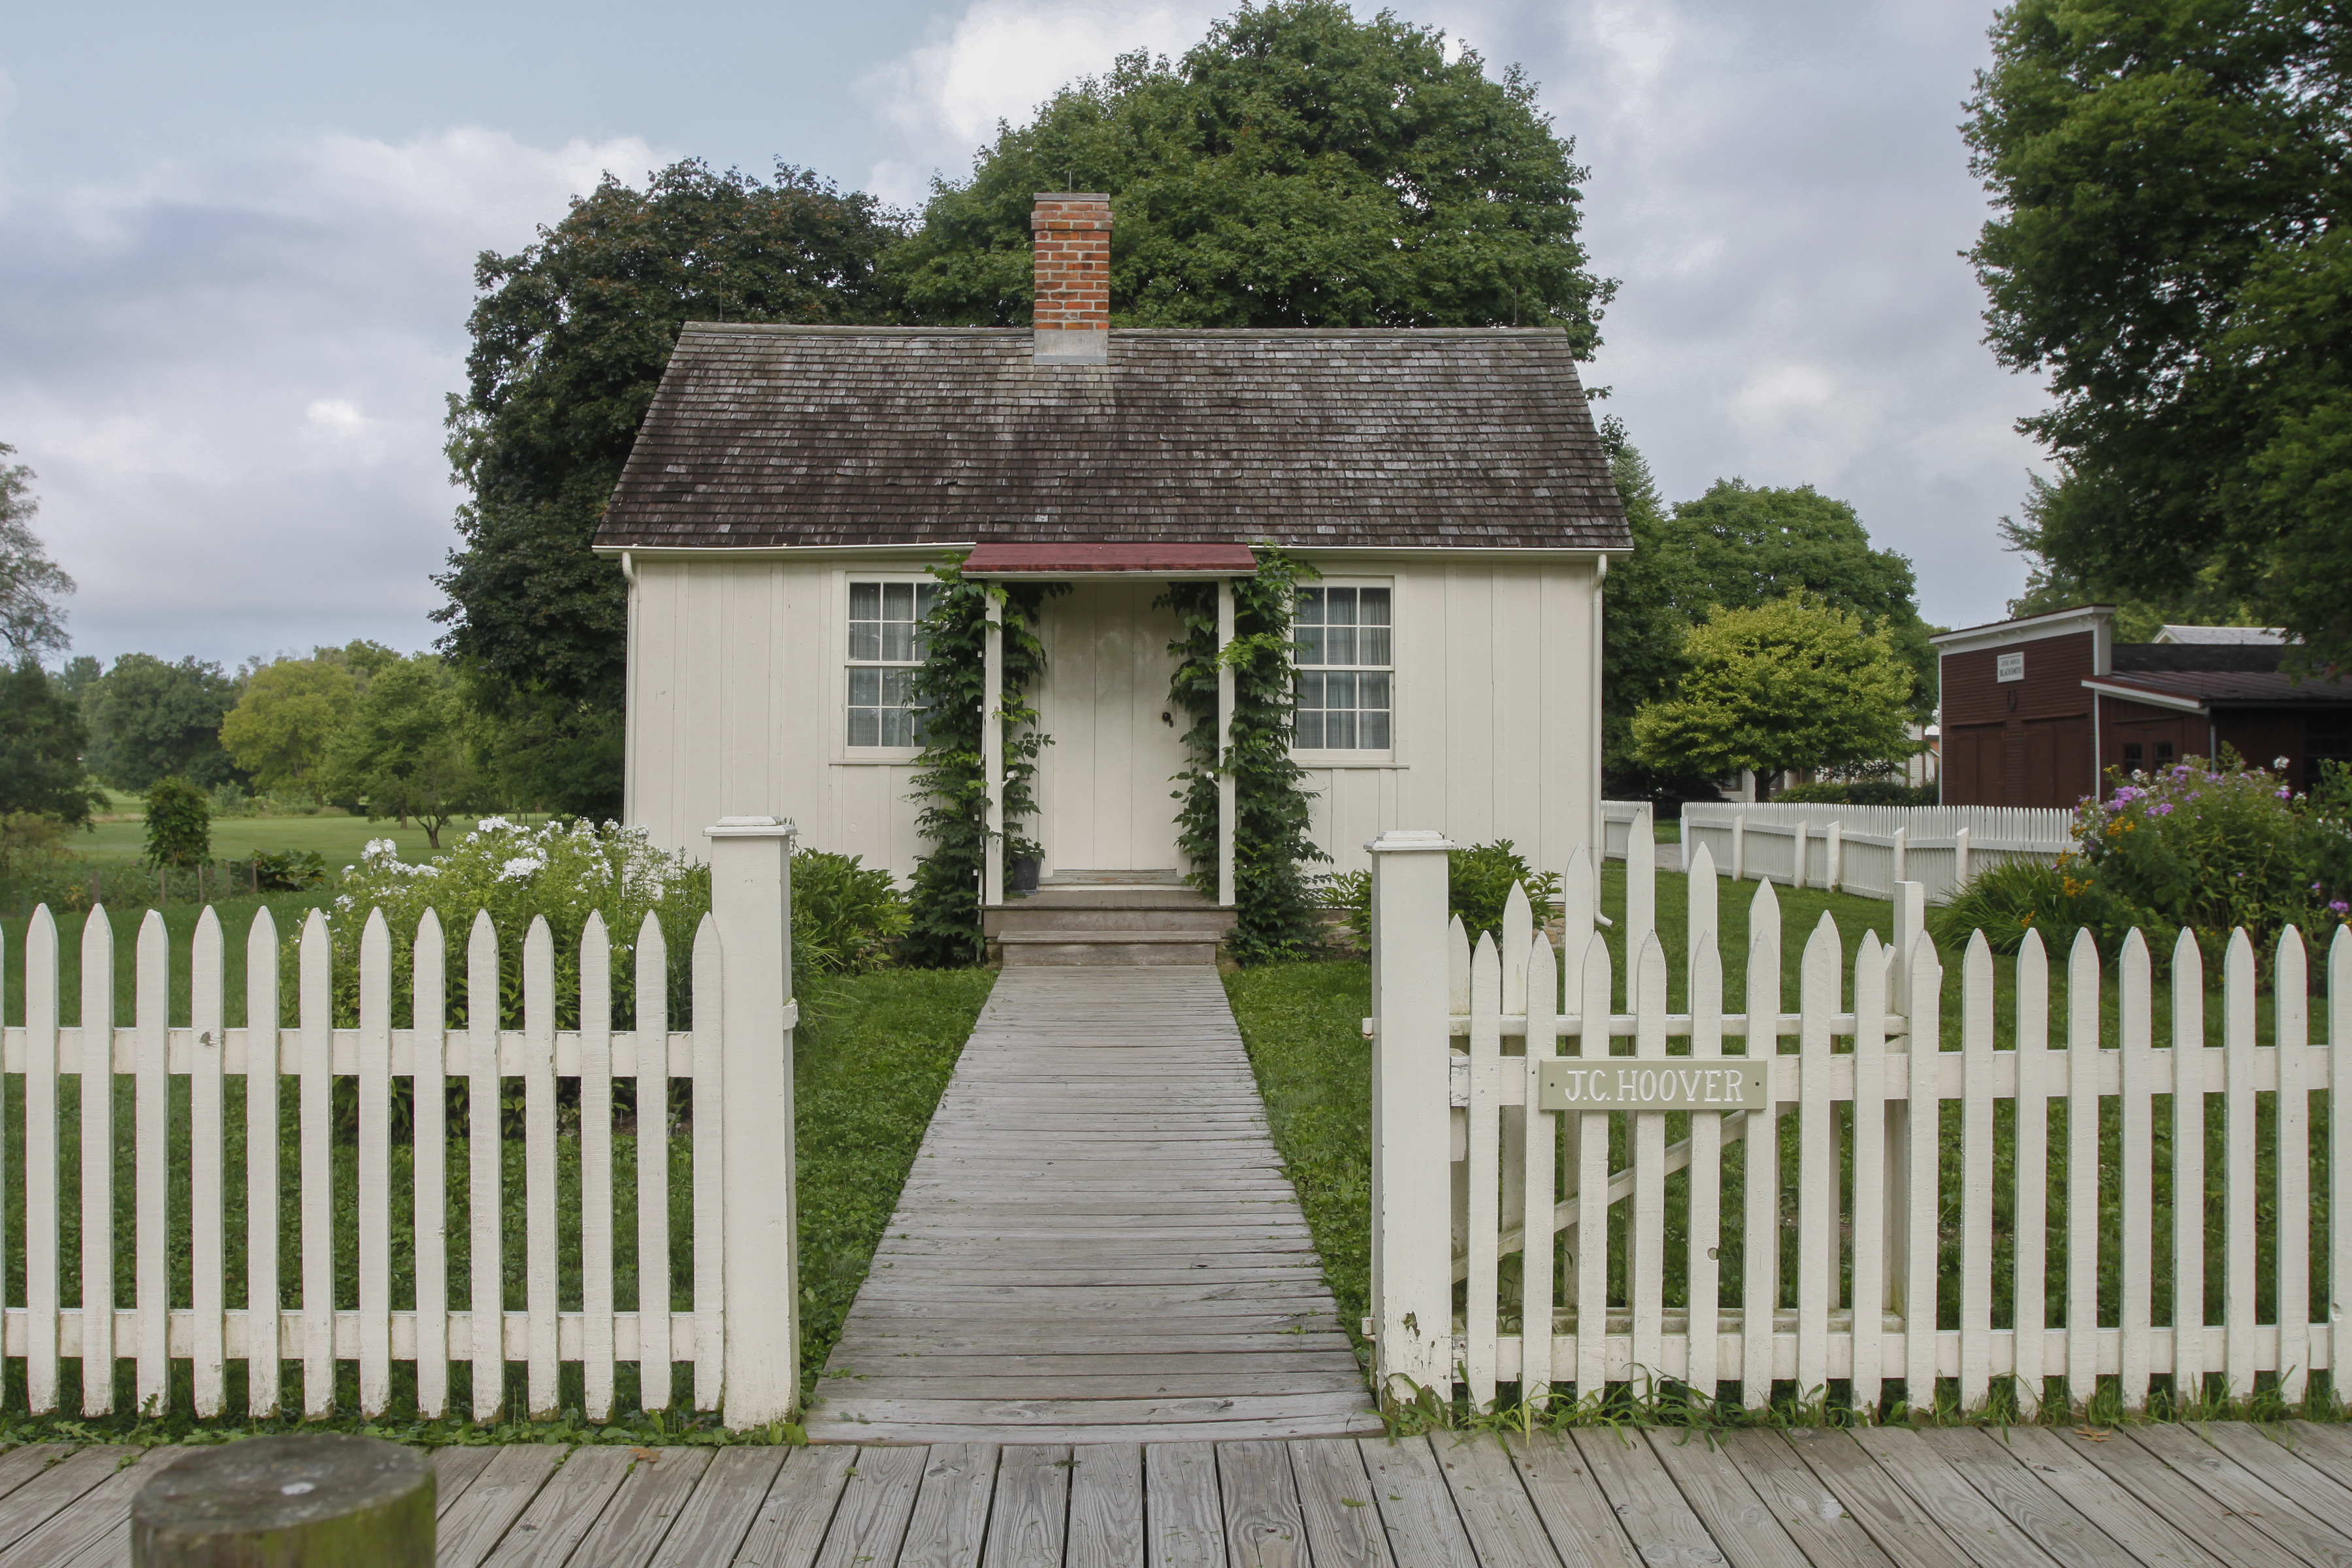 White cottage with picket fence surrounding it